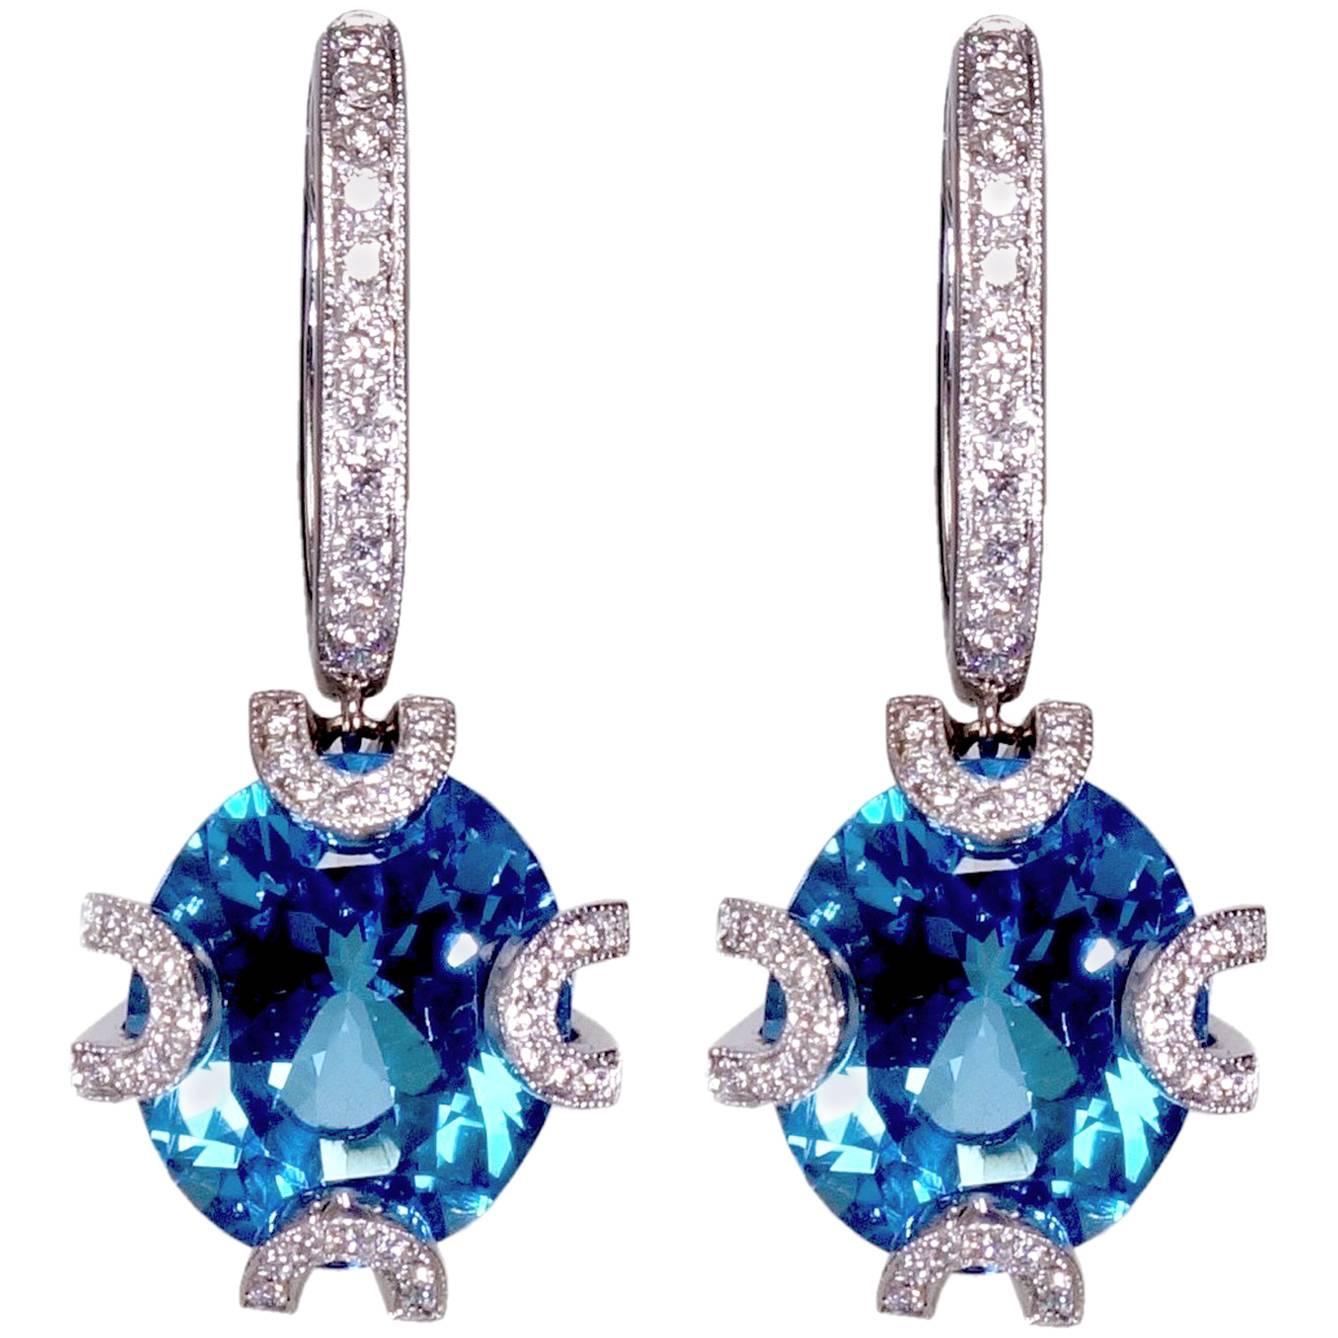 Highly Crafted 18K Gold Diamond Earrings with Electric Blue Zircon Color Stones